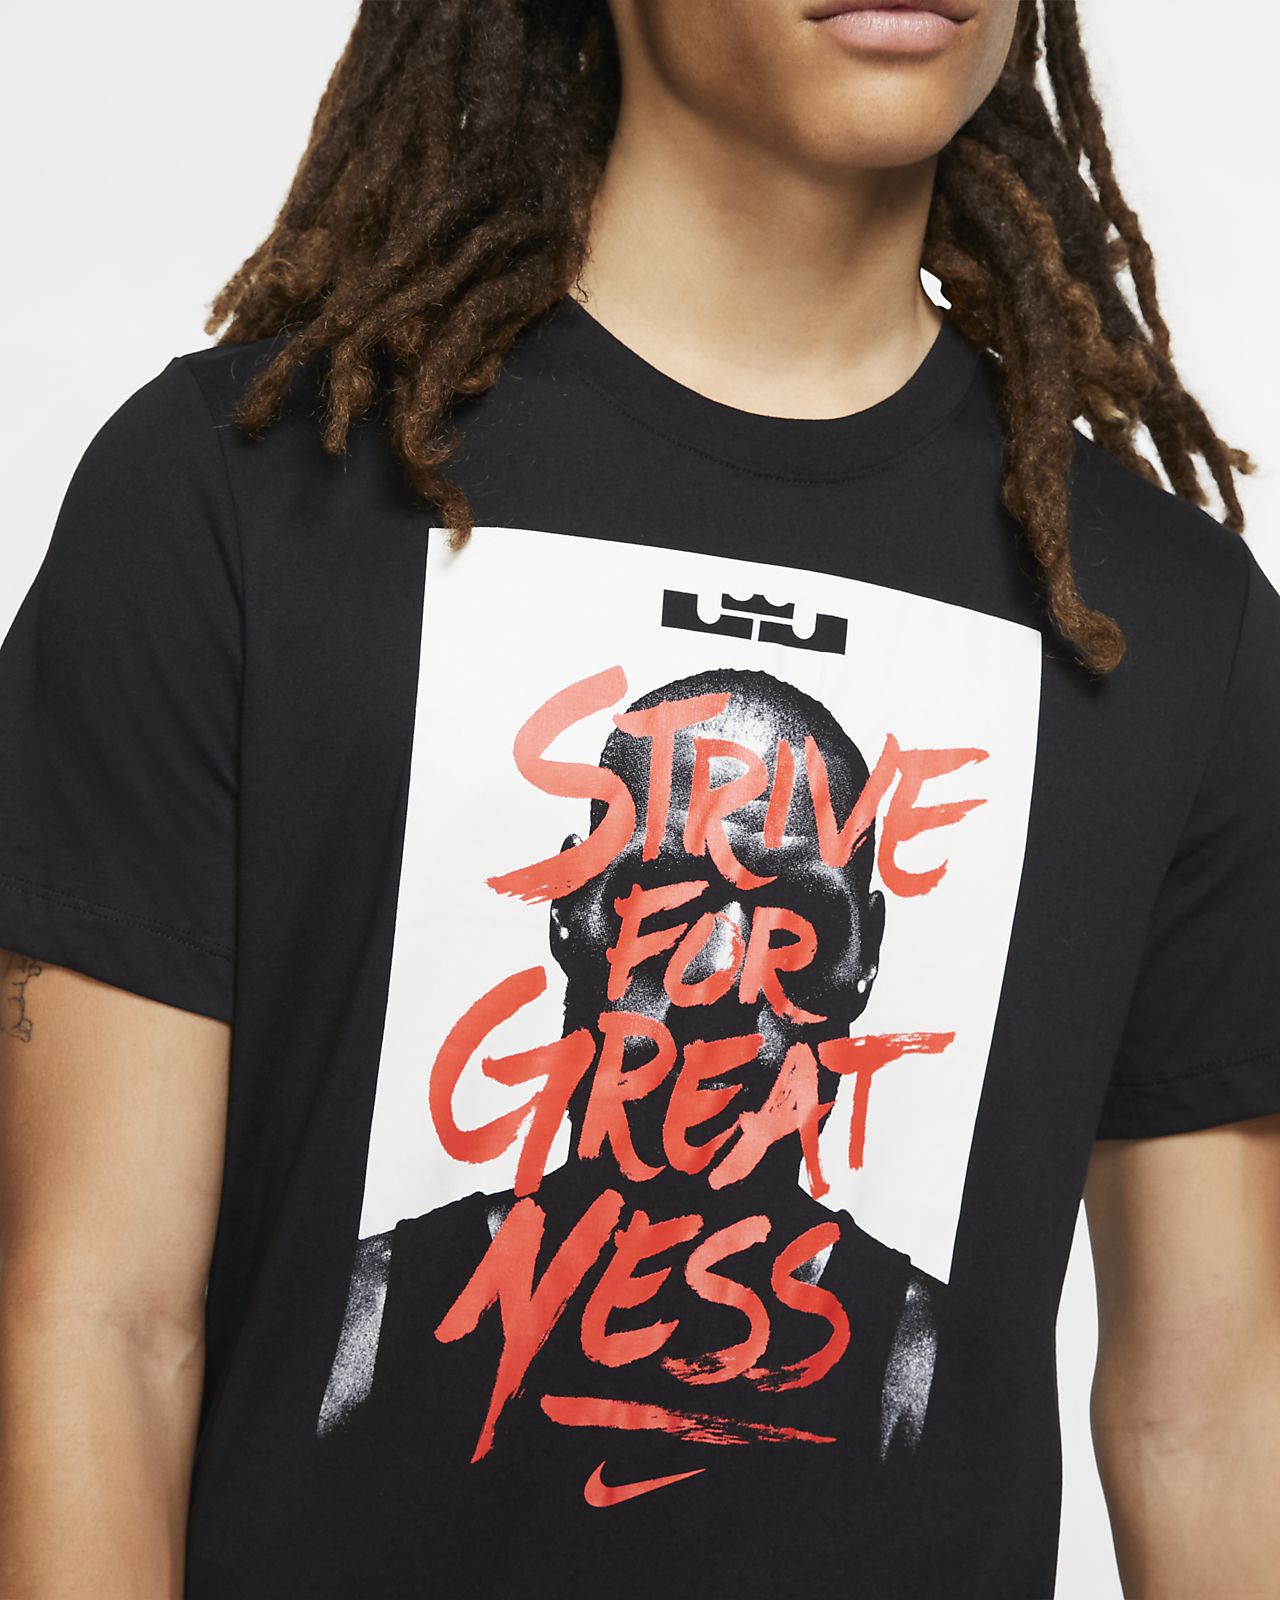 lebron james strive for greatness t shirt